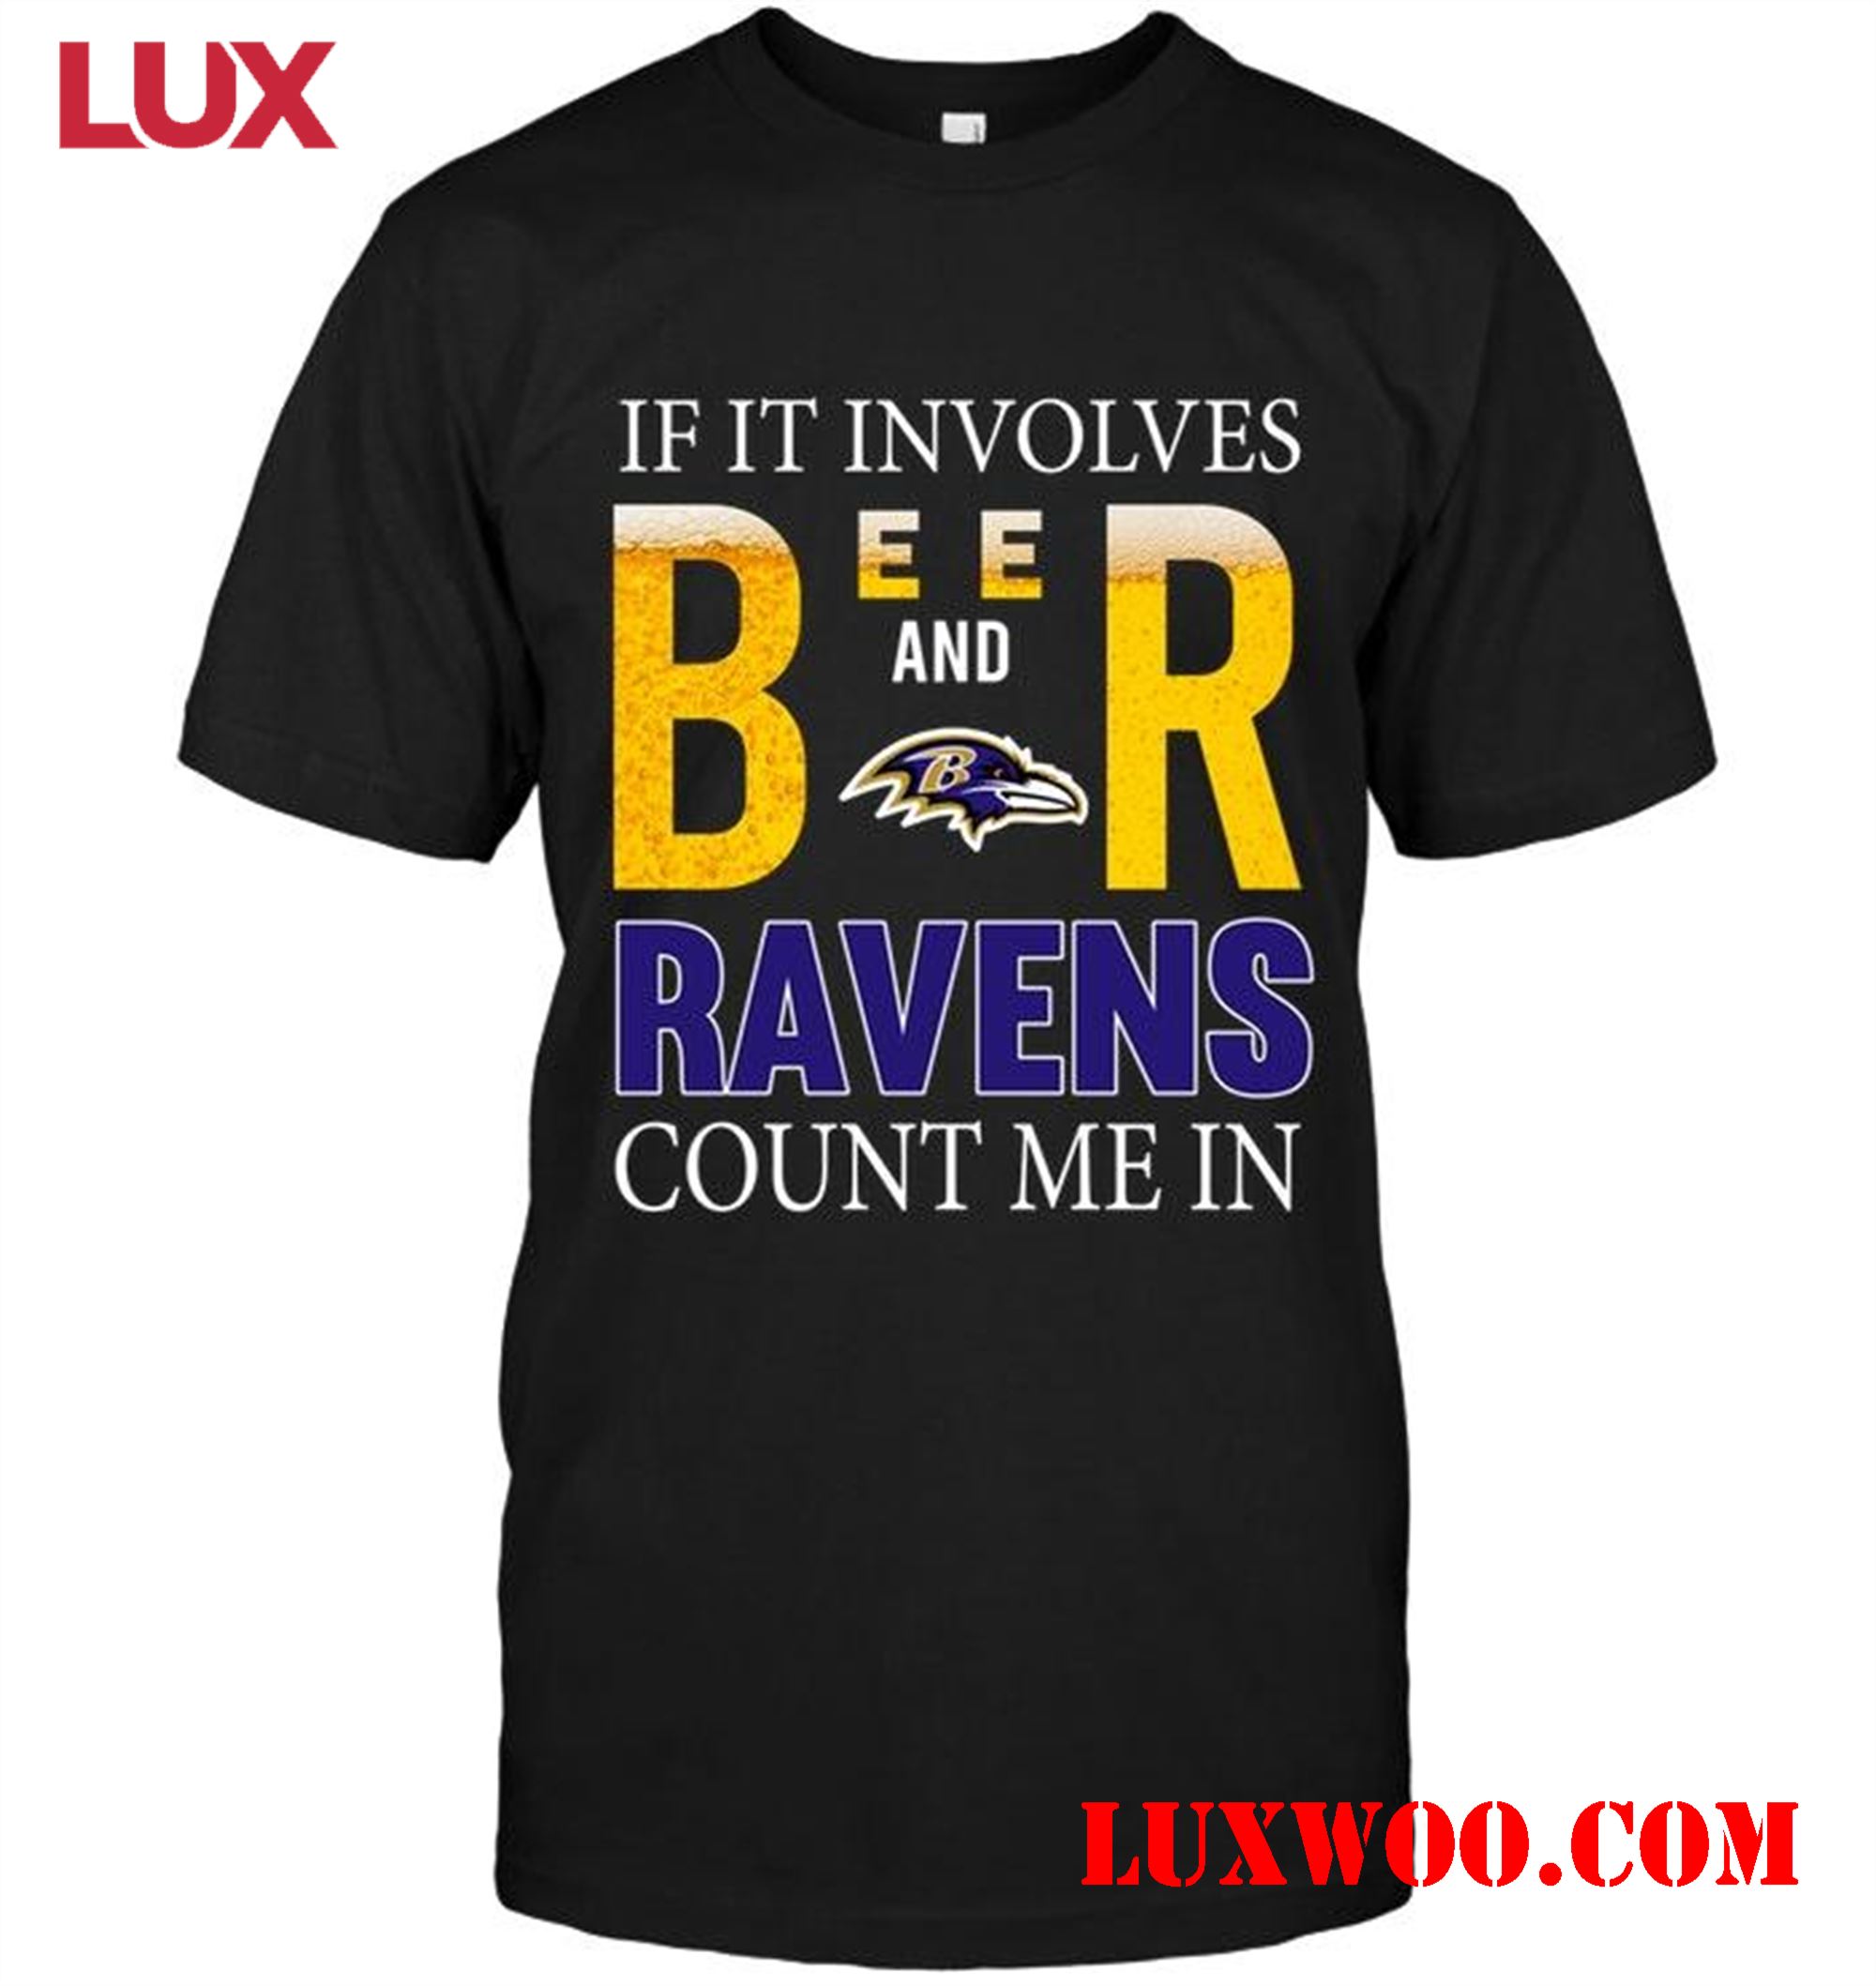 Nfl Baltimore Ravens If It Involves Beer And Baltimore Ravens Count Me In Shirt 